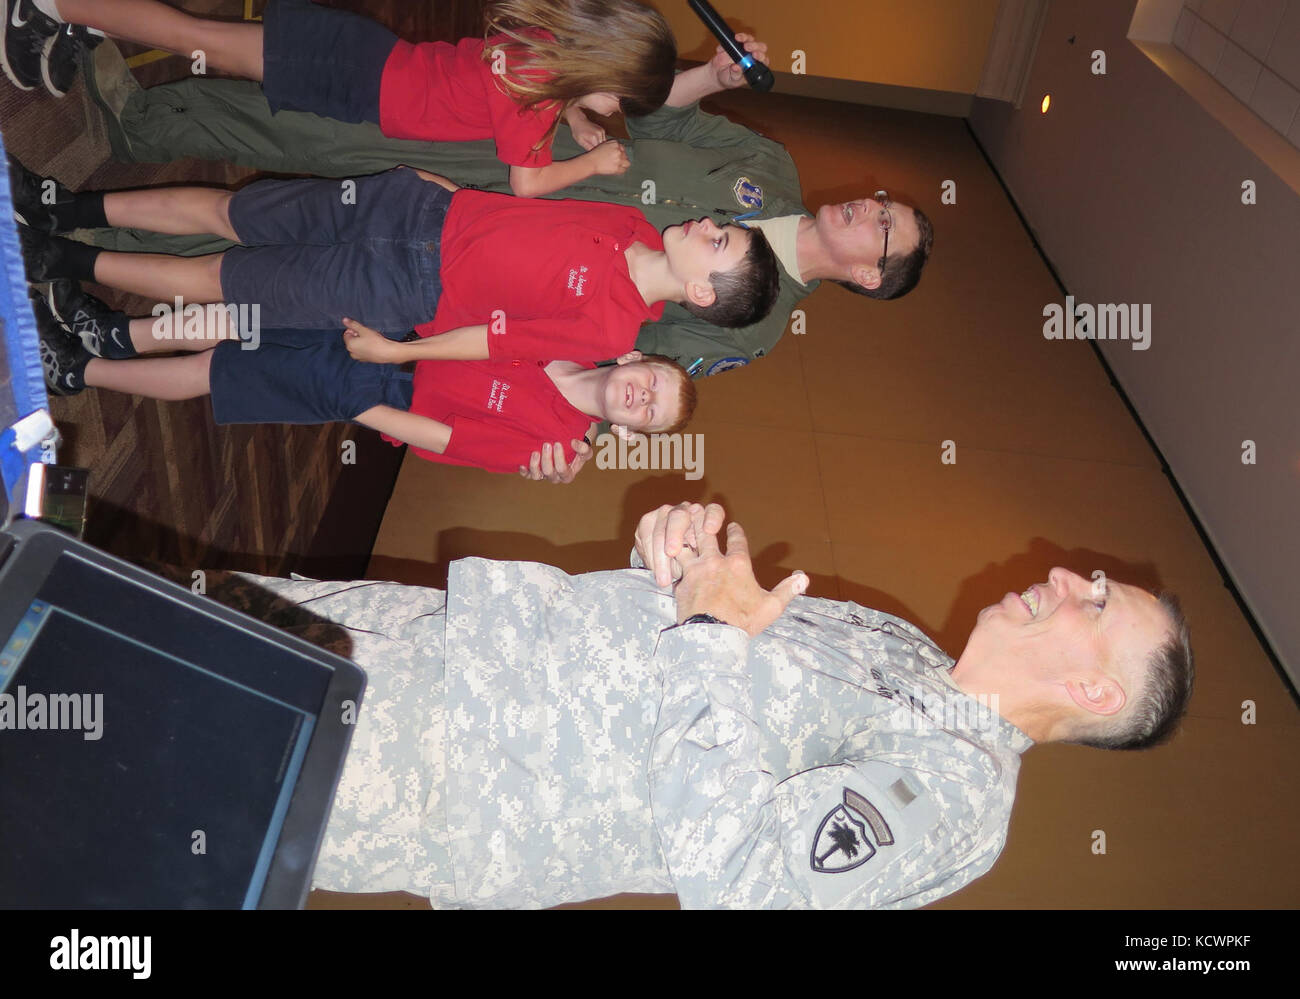 Members of the South Carolina Army and Air National Guard honor their spouses and family members at a Military Spouse Appreciation Day gathering in Columbia, South Carolina, May 5, 2016. The event was hosted by the Service Member and Family Care Directorate Family Programs to thank military spouses in the S.C. National Guard. (U.S. Army National Guard photo by Lt. Col. Cindi King/ released) Stock Photo